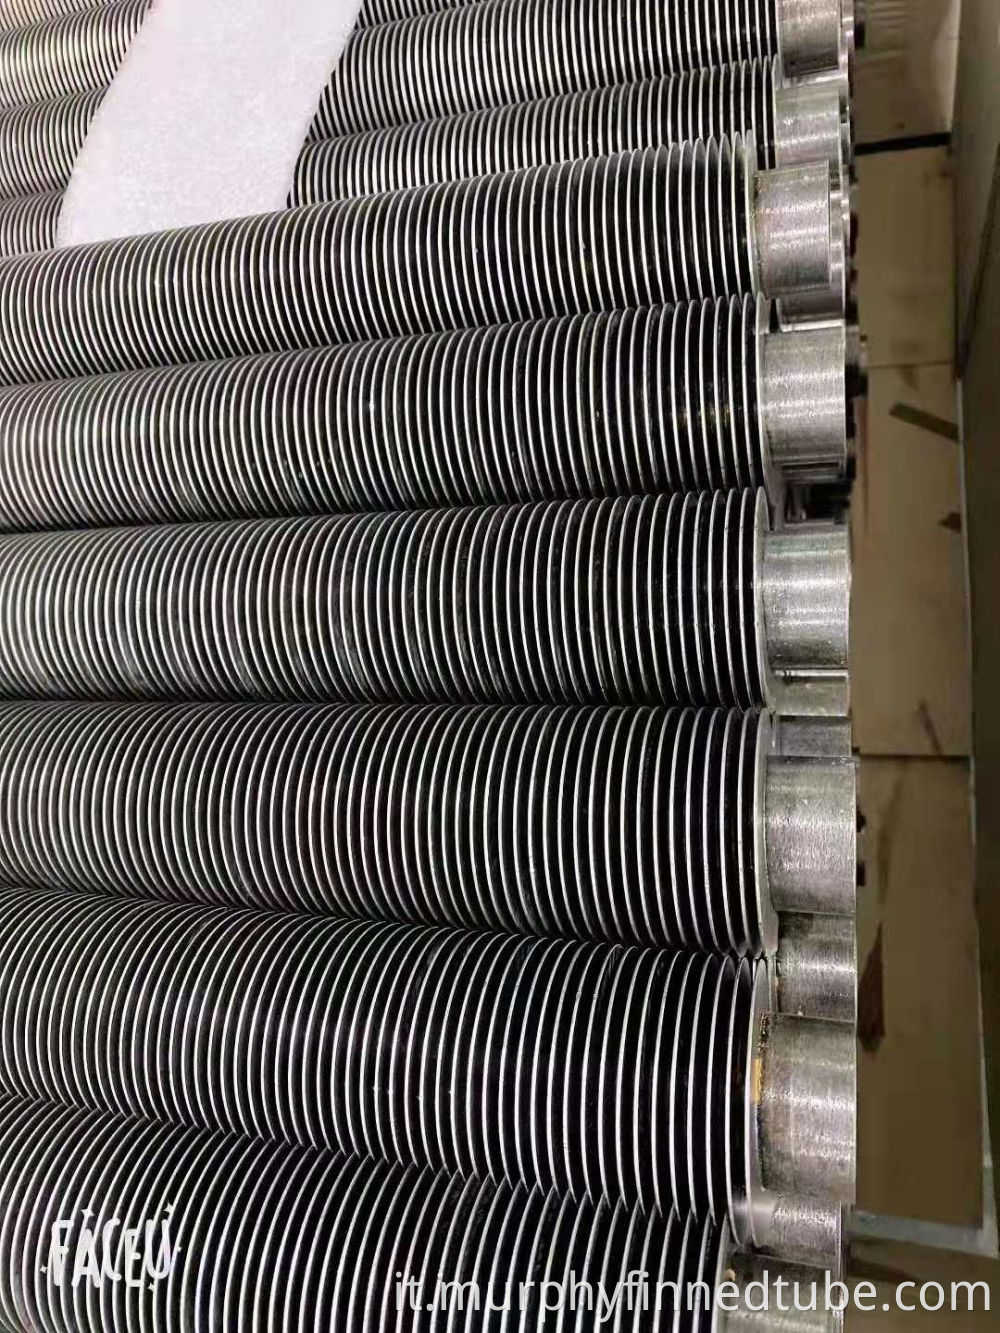 Welded Spiral Pipe